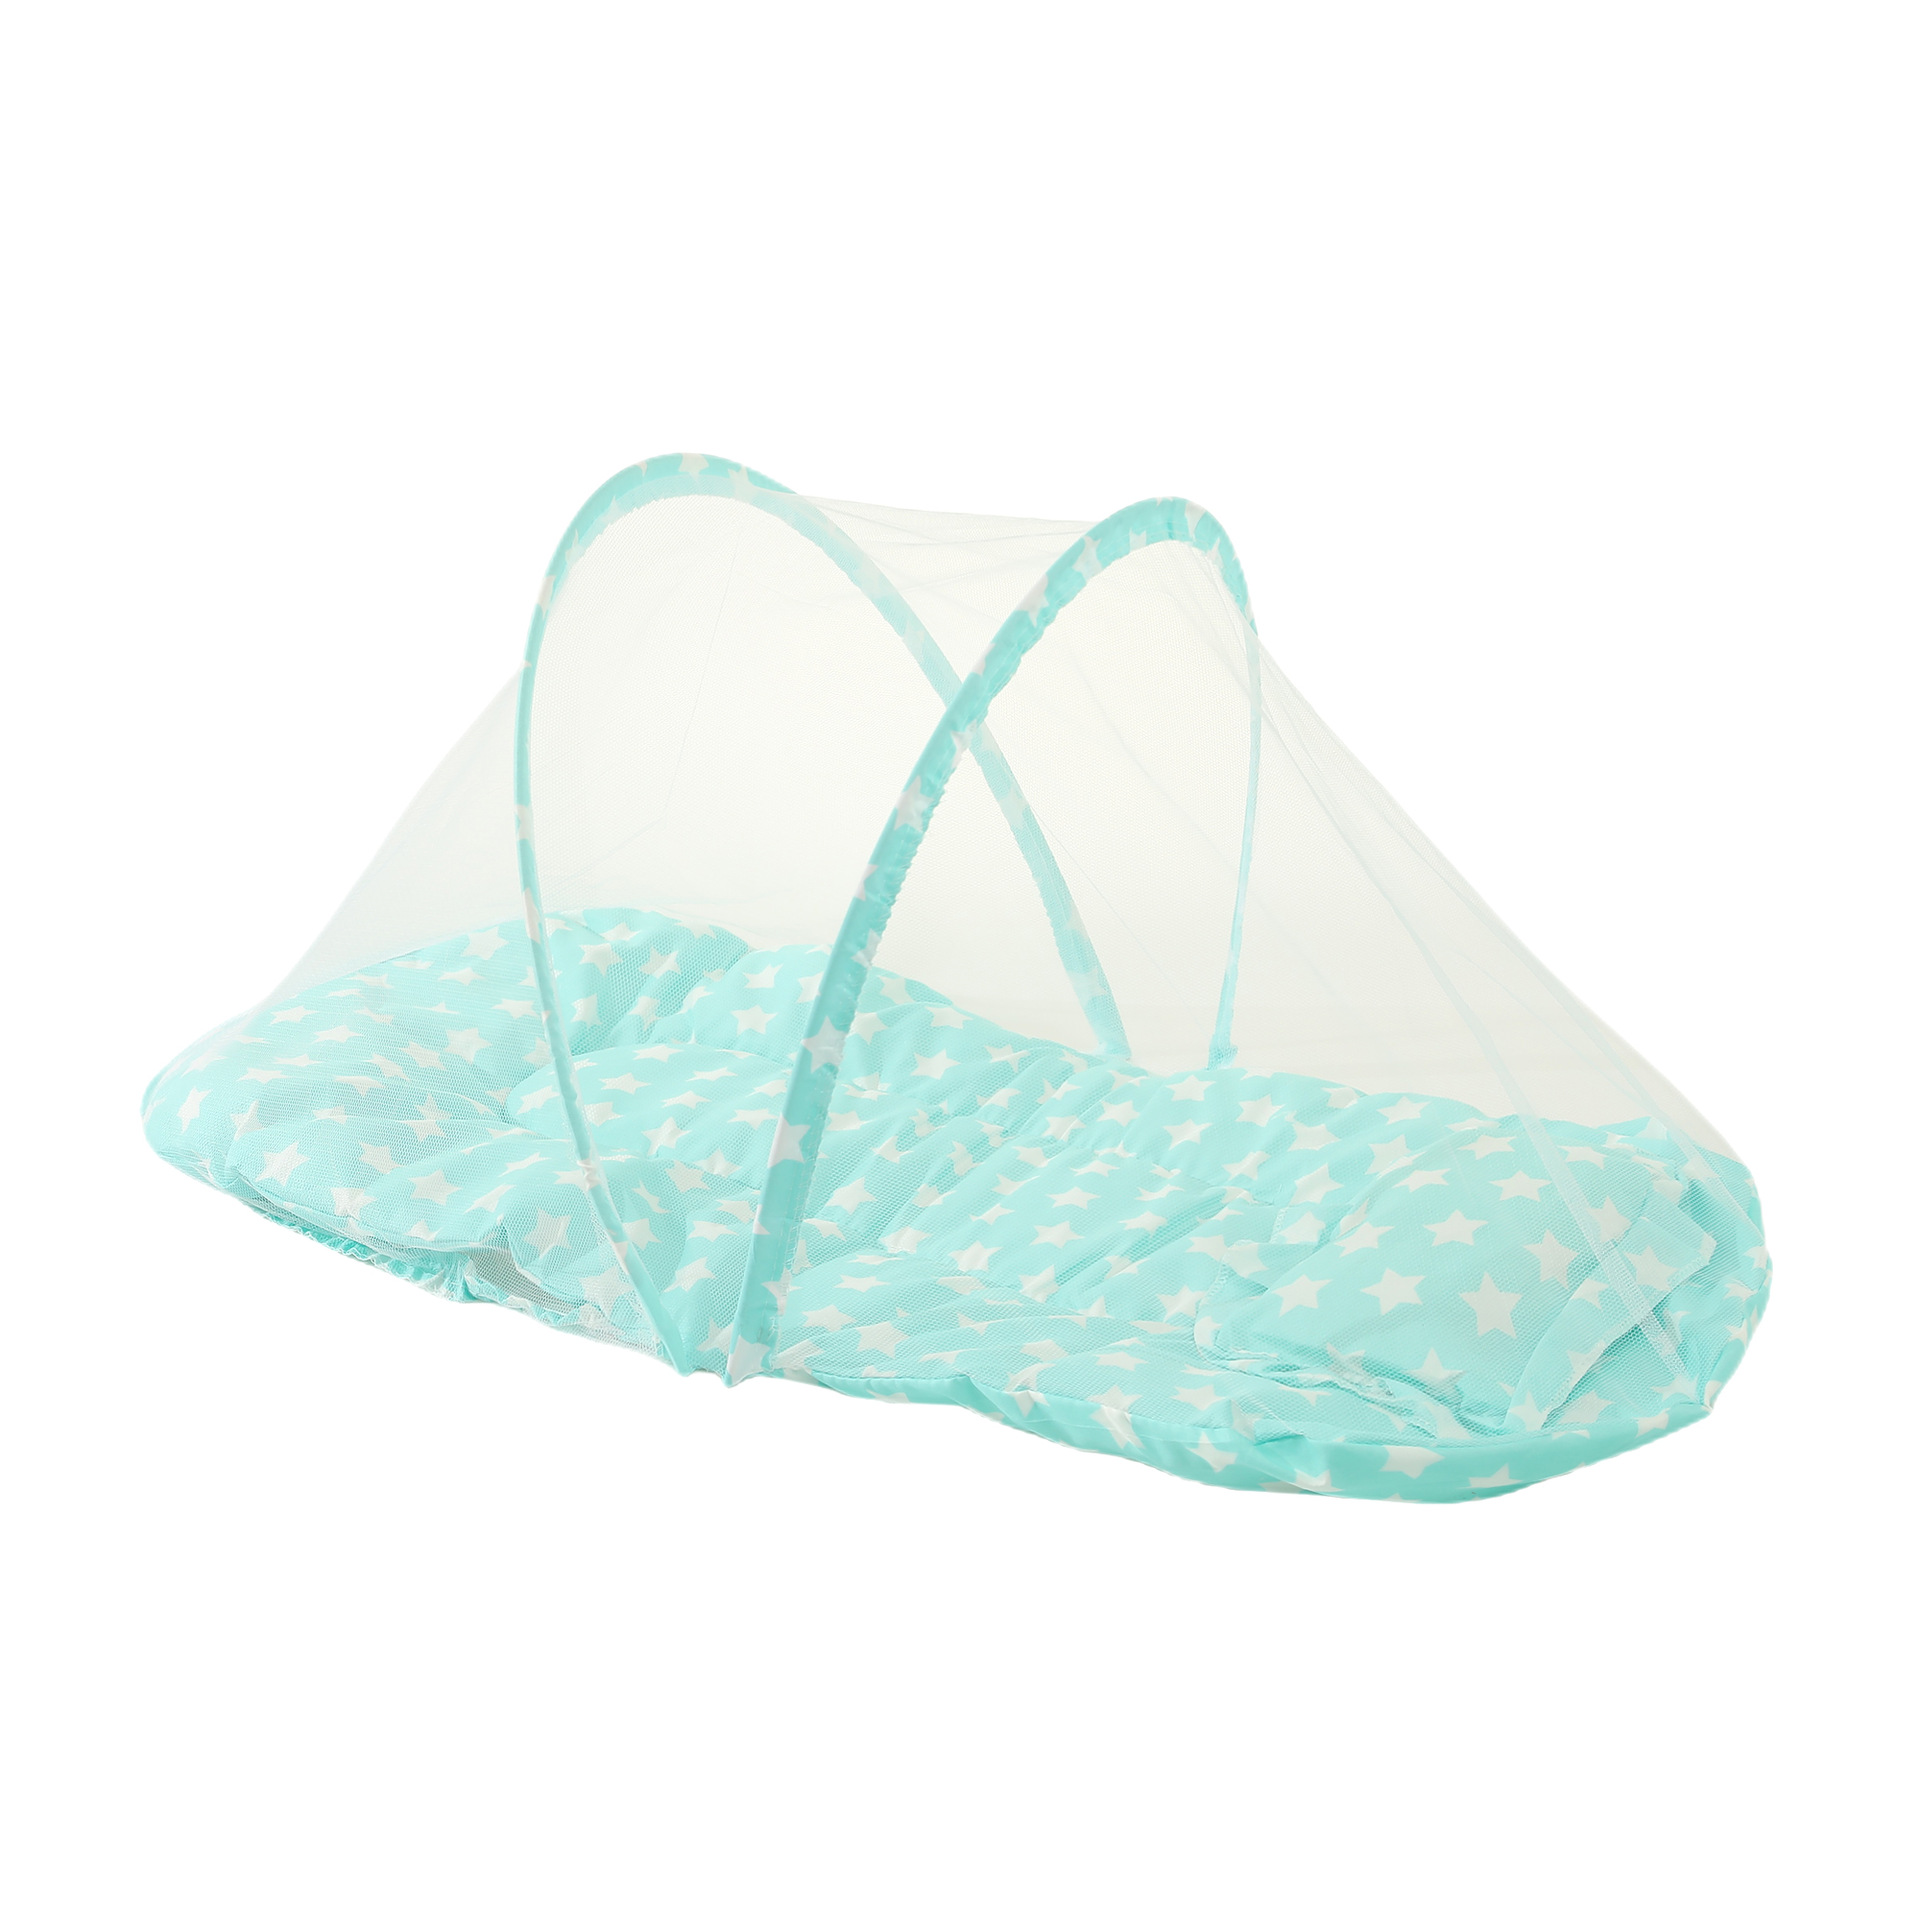 Cross-Border Hot Sale Baby Portable Mosquito Net Bed Baby Foldable XINGX Mosquito Net Cover Children Harness Cotton Cushion Pillow Mosquito